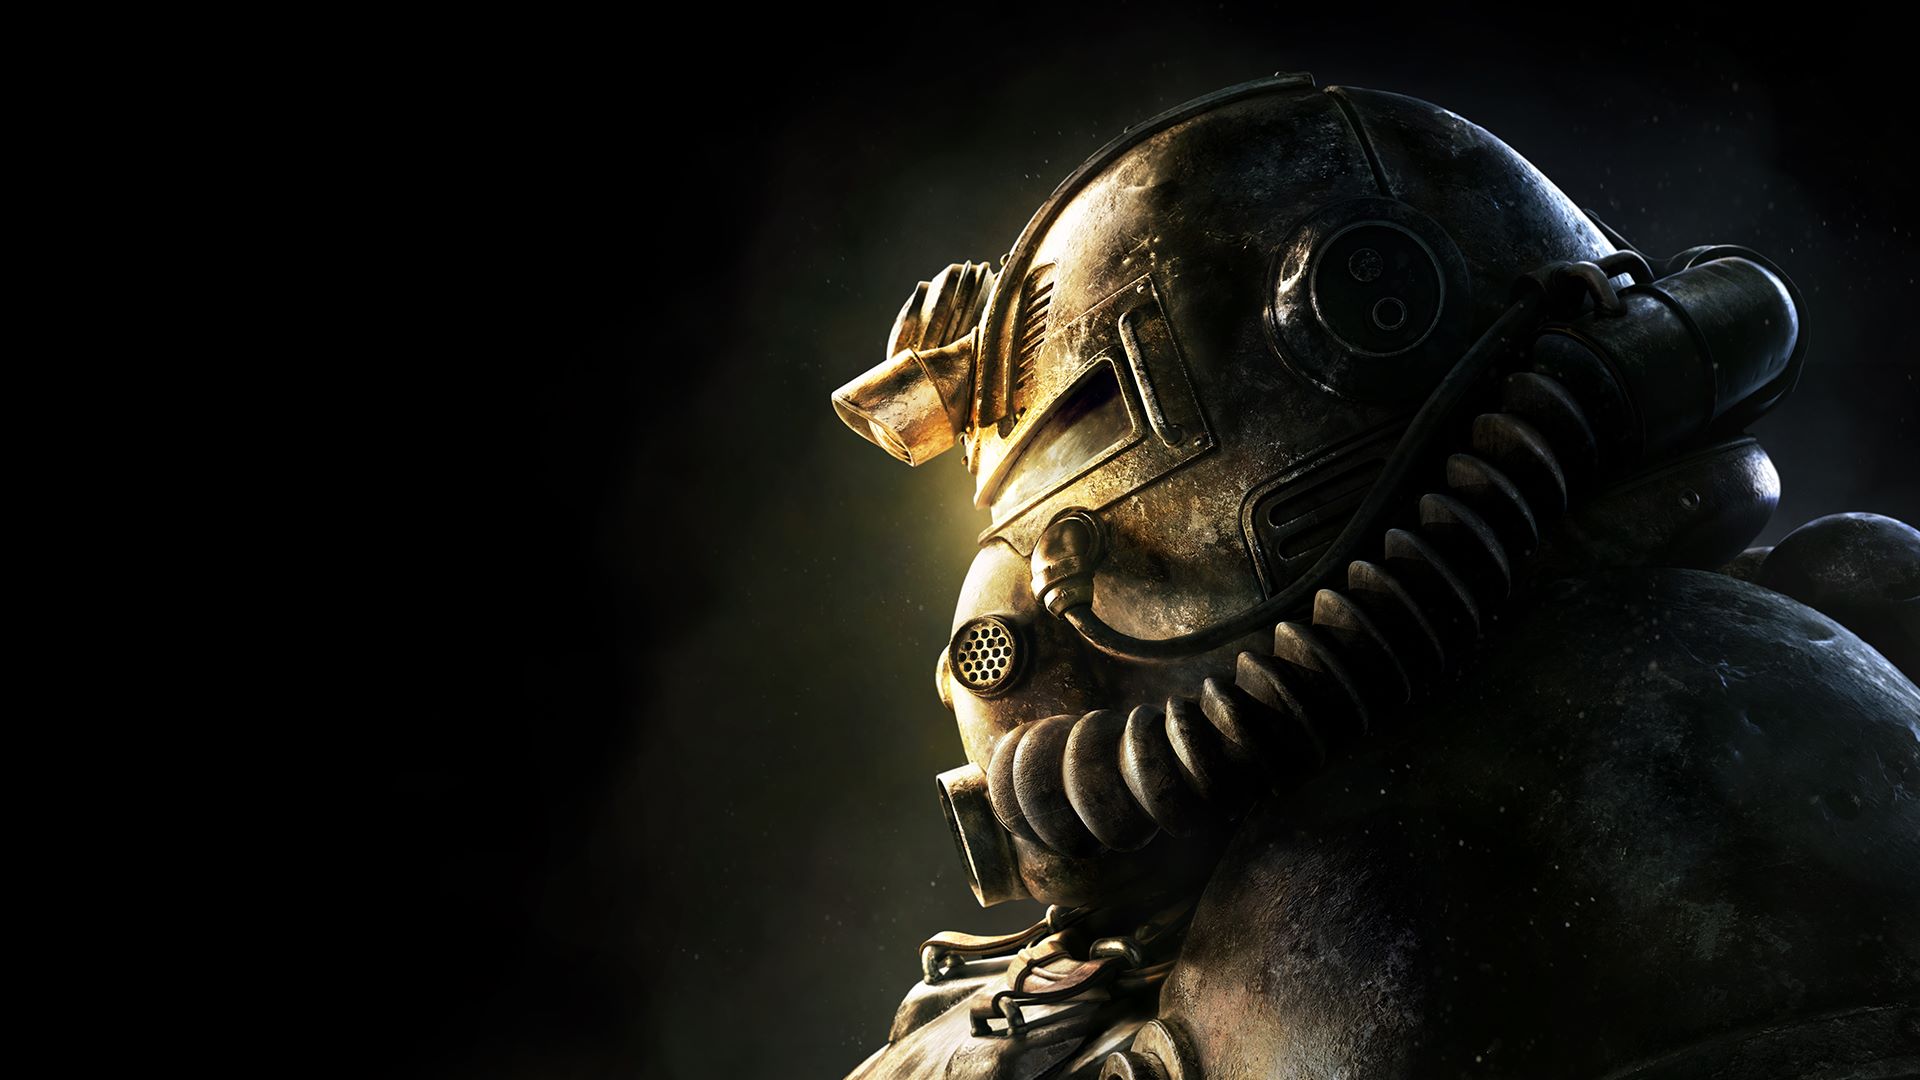 Fallout TV series moves forward with Westworld co-creator Jonathan Nolan directing